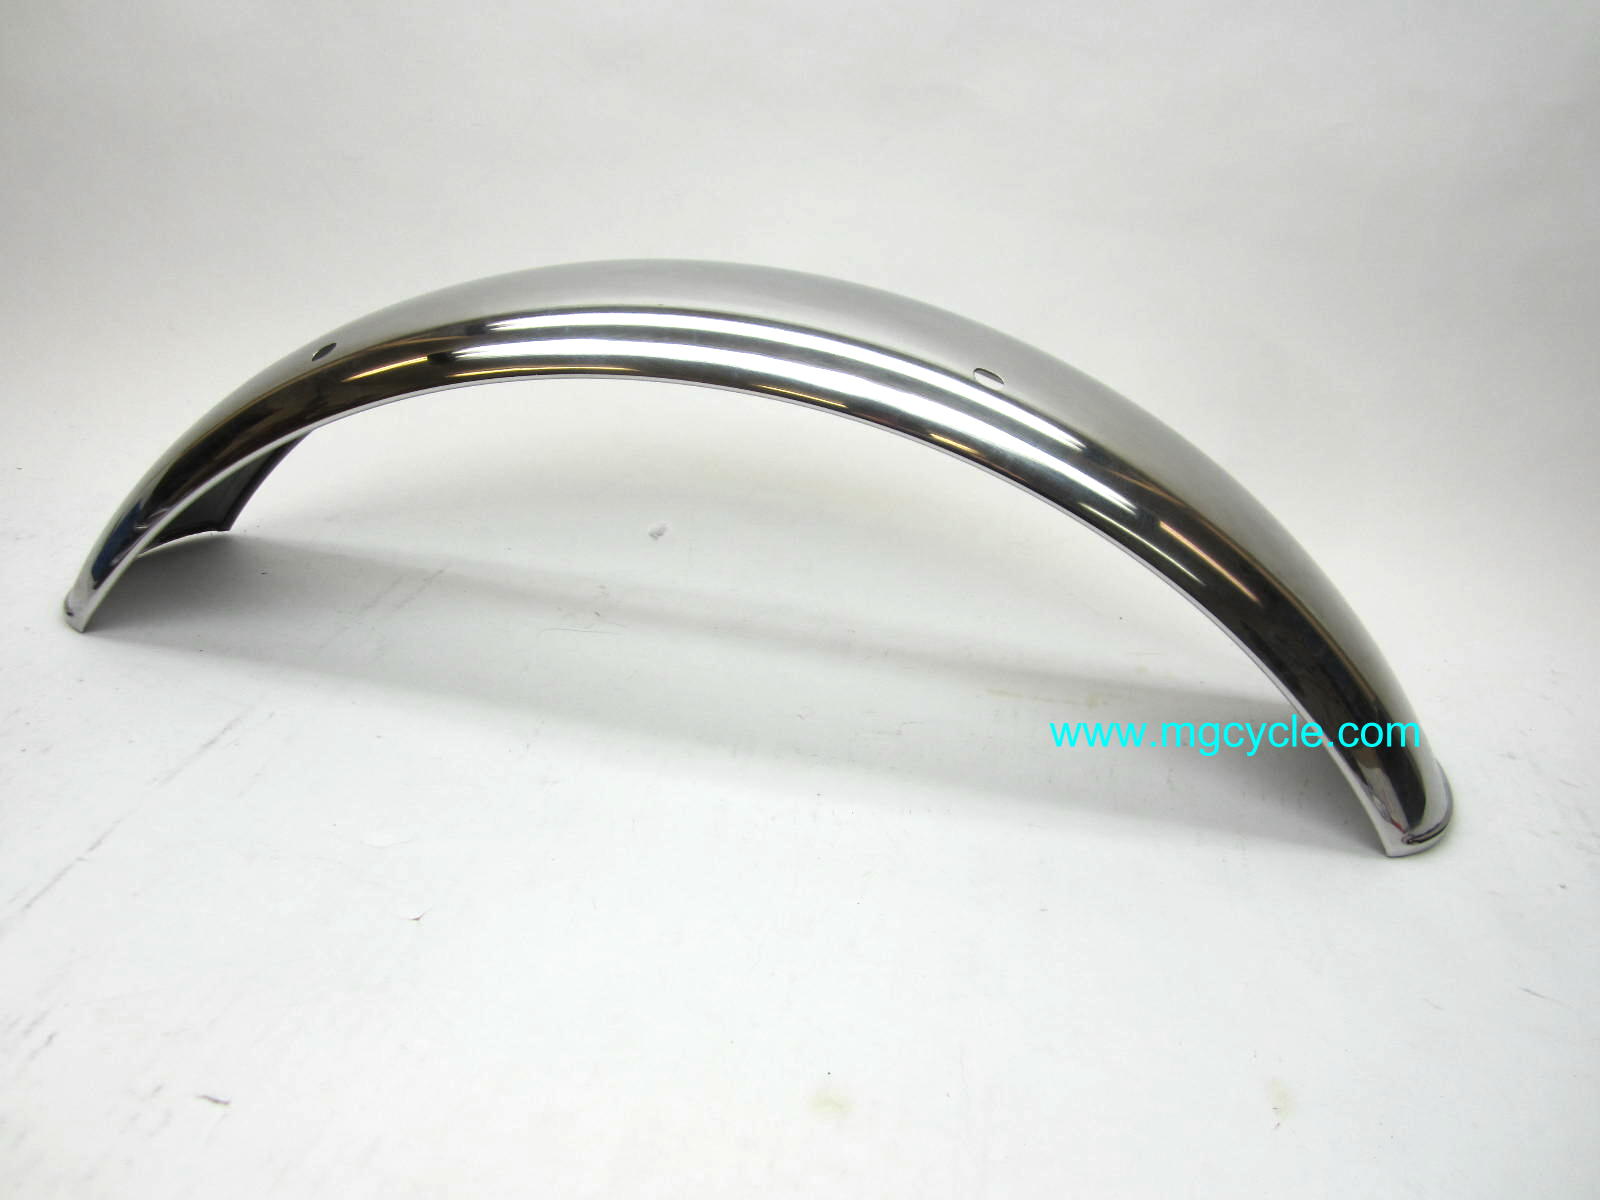 V7 Sport 750S stainless front fender, mudguard - Click Image to Close